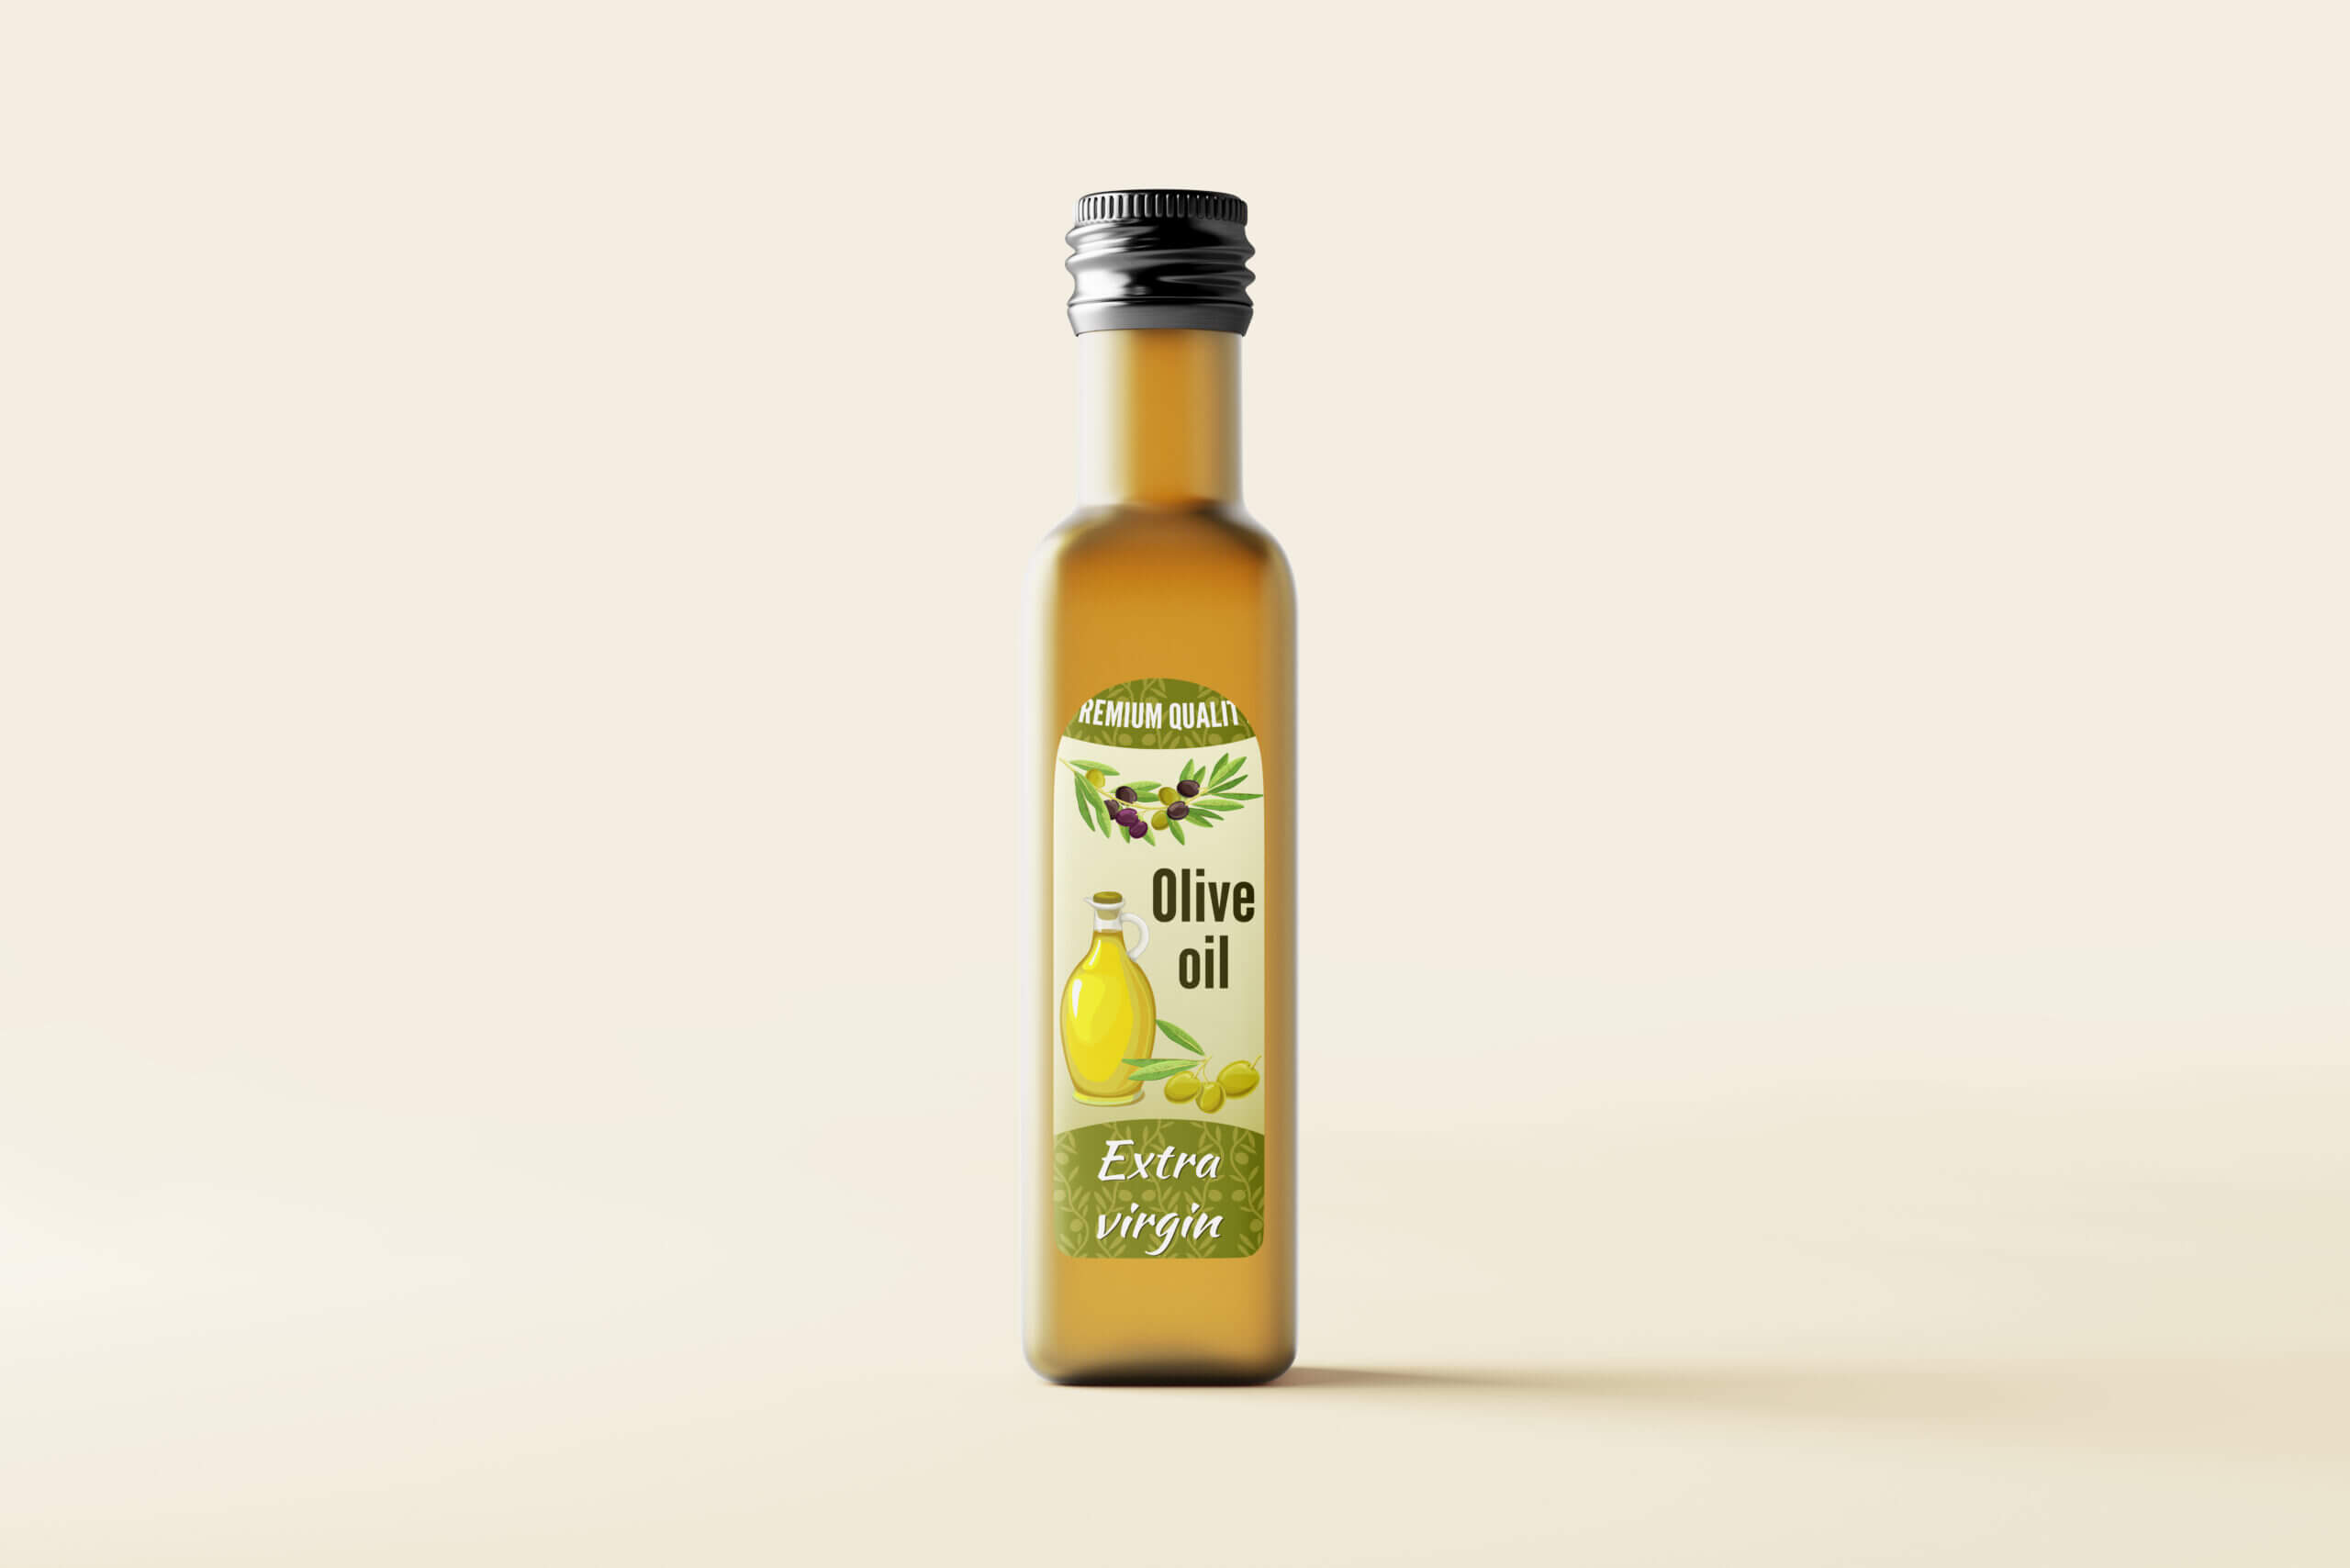 5 Free Amber Glass Square Cooking Oil Bottle Mockup PSD Files2